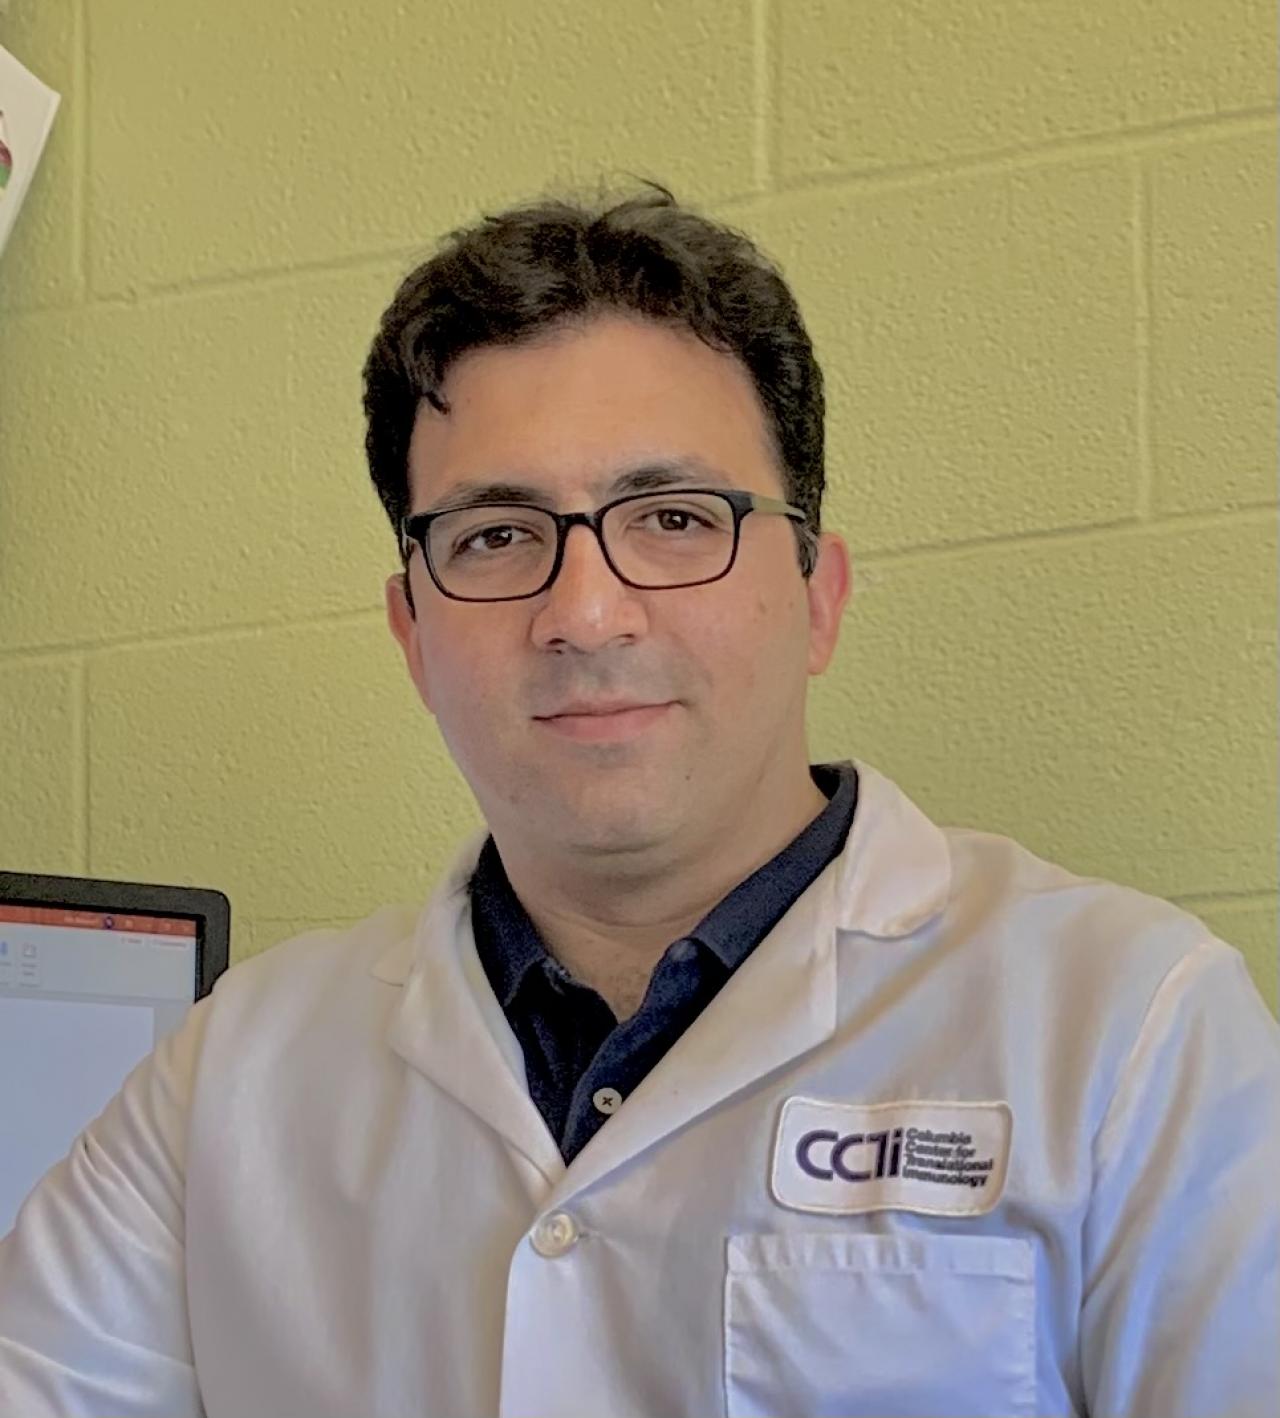 Mohsen Maharlooei, PhD, in a lab setting wearing a white coat